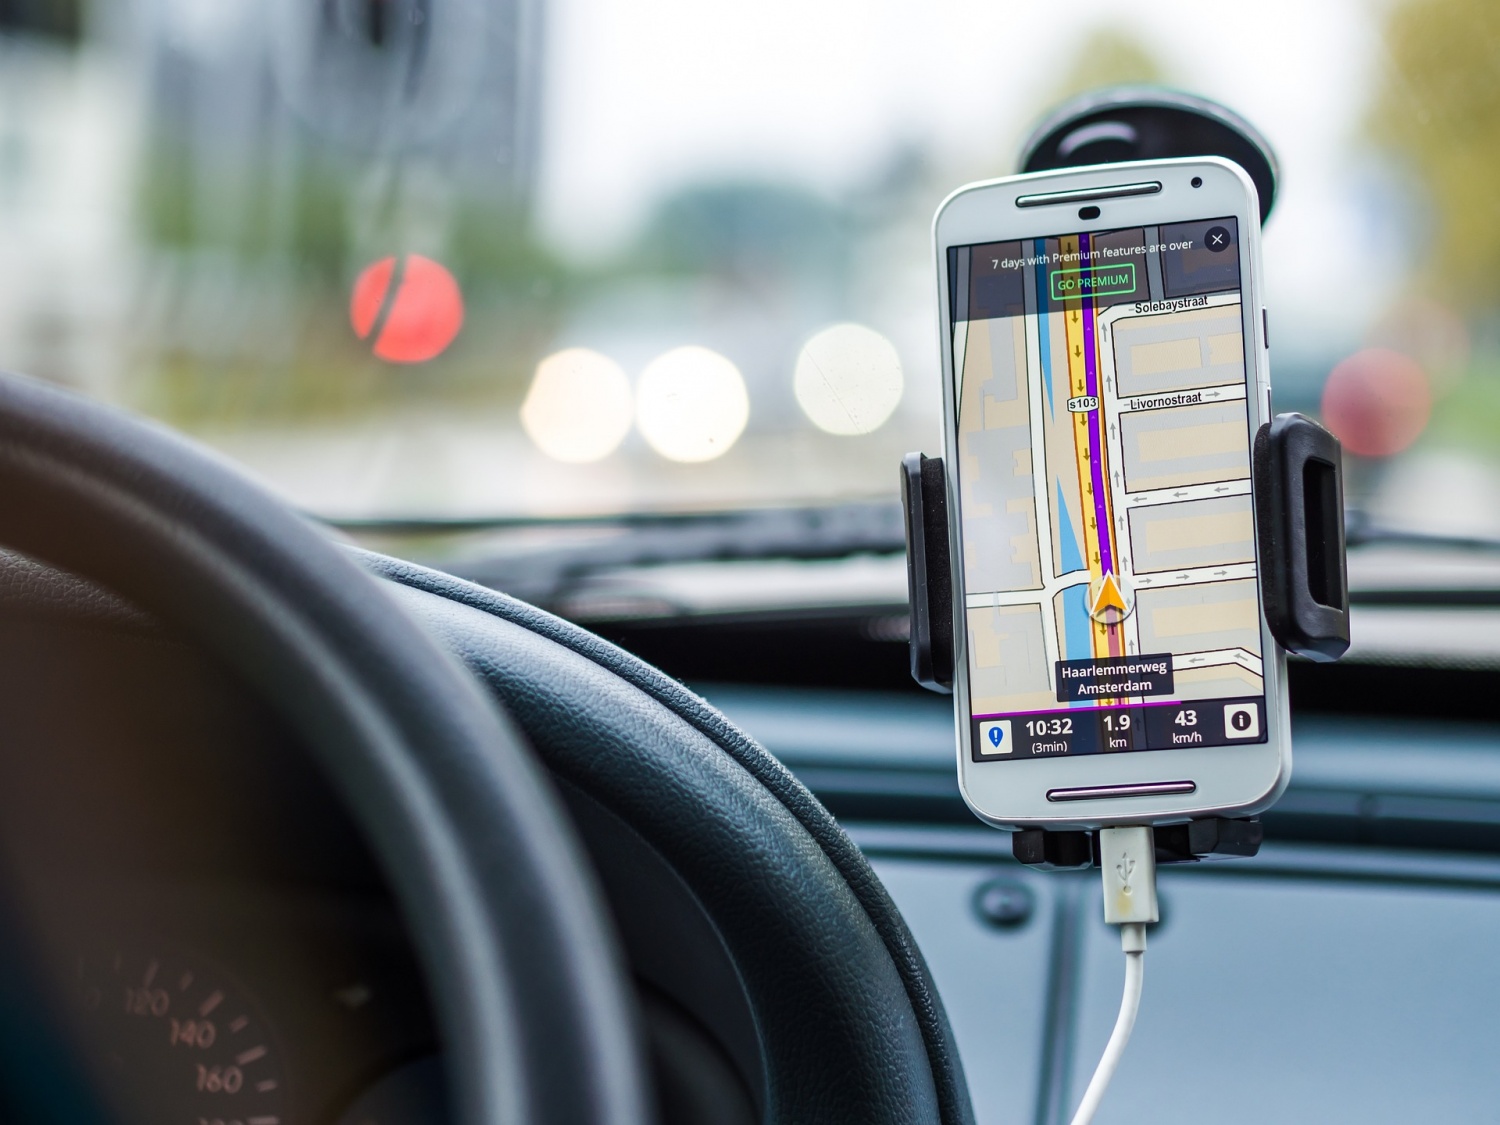 Google Reportedly Lifts Android Auto’s Restriction for Maps Display on Phones, Cars